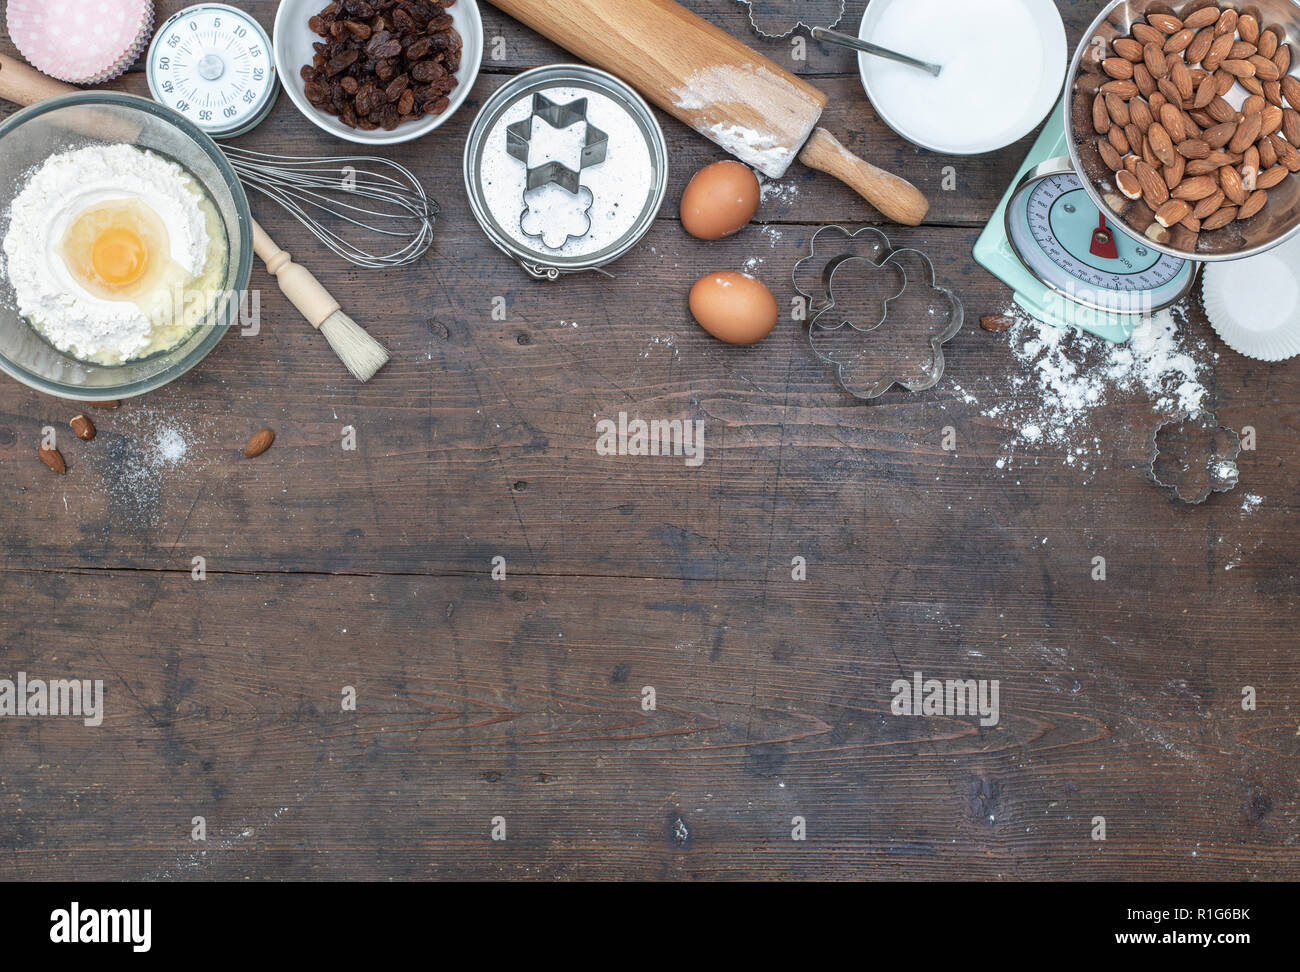 Home baking kitchen setting with ingredients for bread and cup cakes Stock Photo